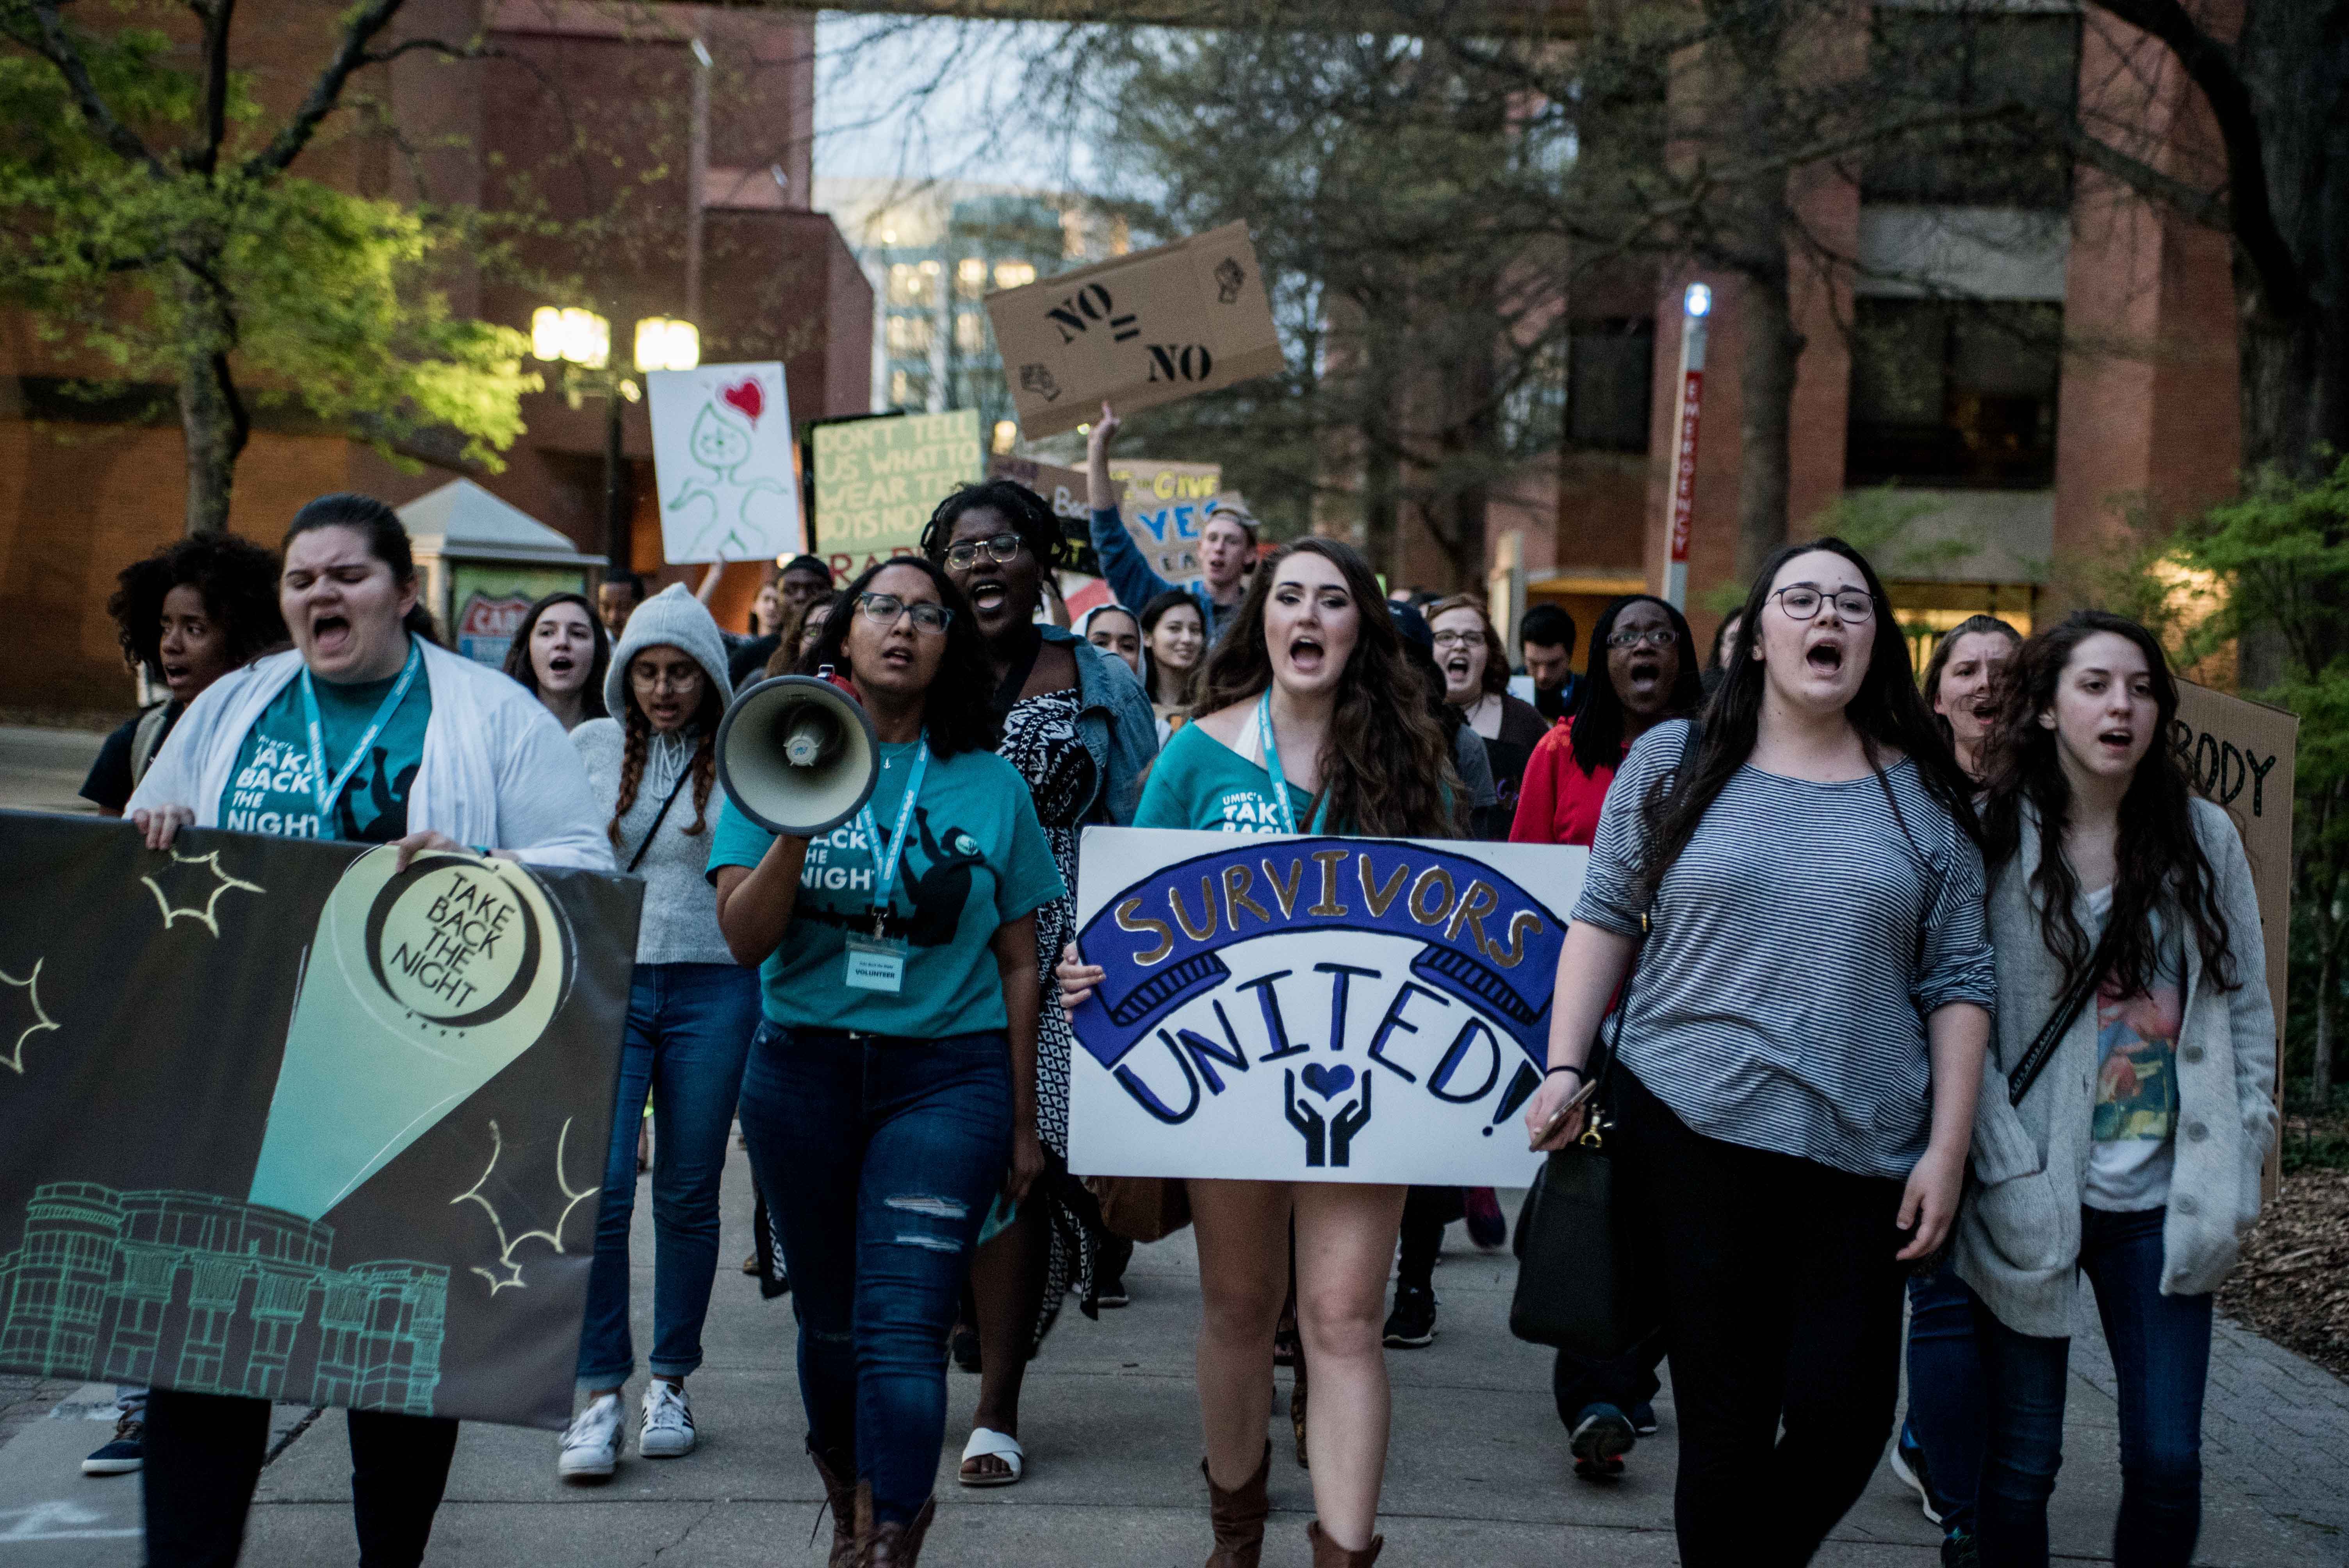 Five students are mid-chant at the front of the Take Back the Night march with a crowd behind them. One student holds a megaphone, one holds a sign that says “Survivors United!”